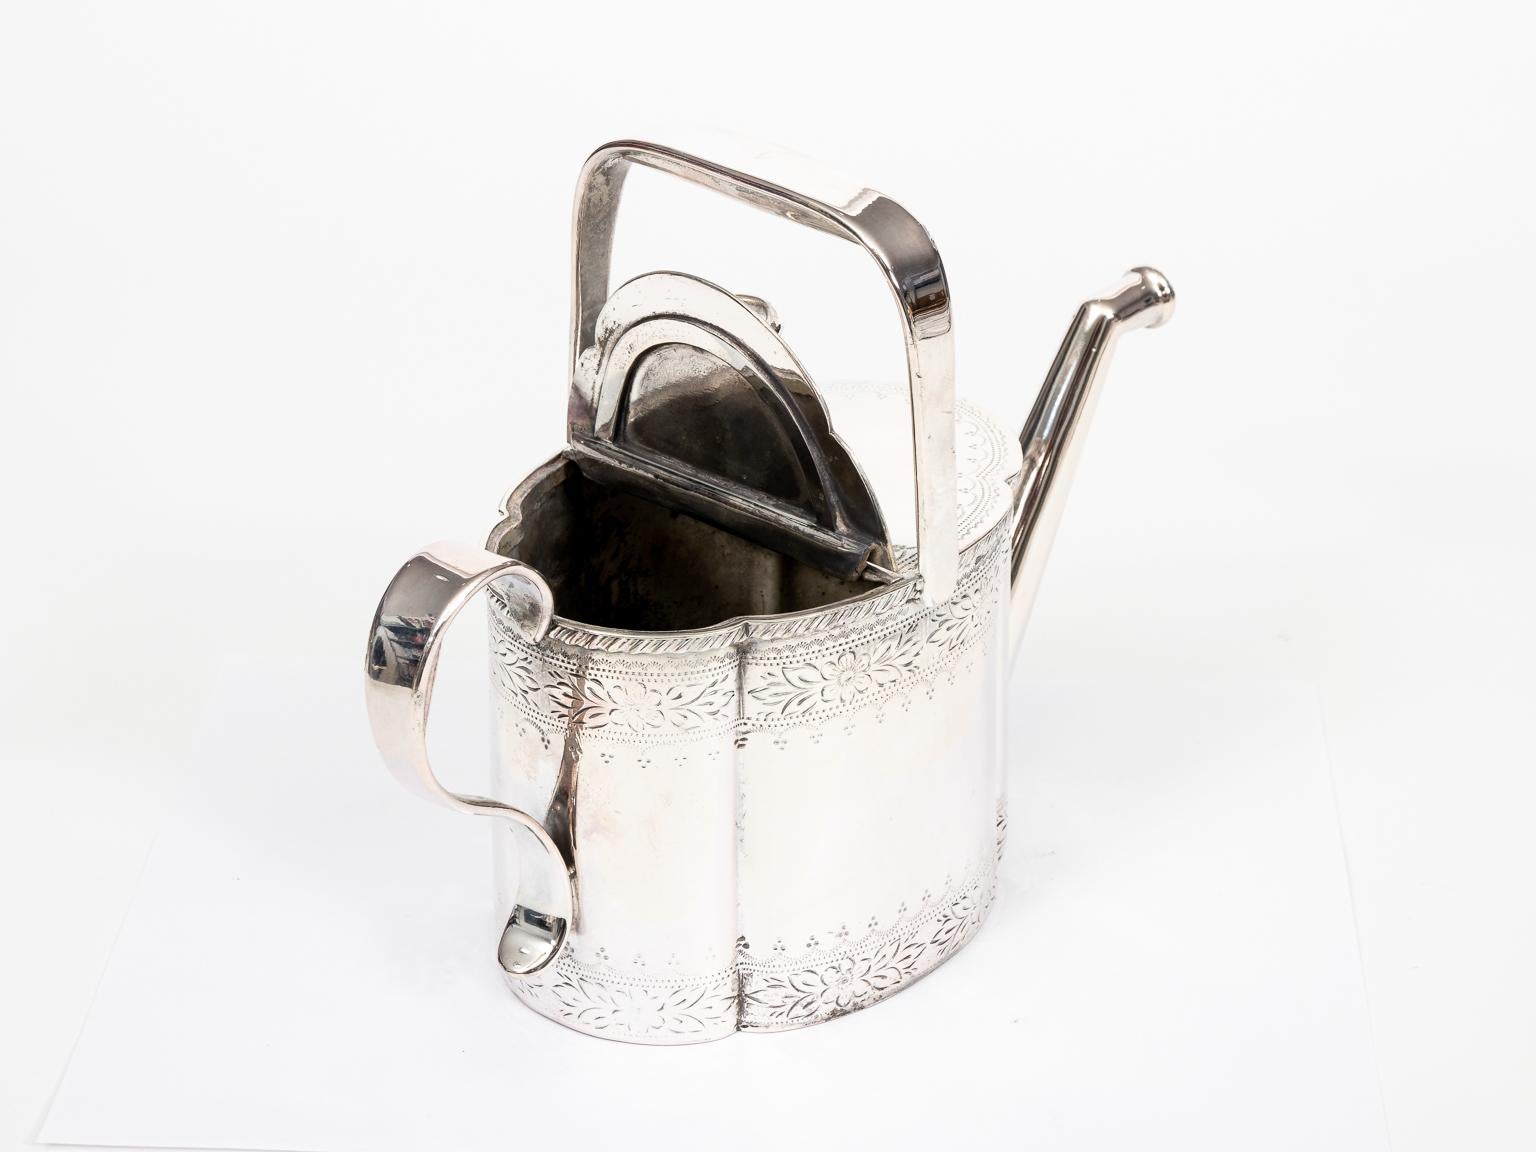 English Edwardian Silver Plate Watering Can with Floral Border